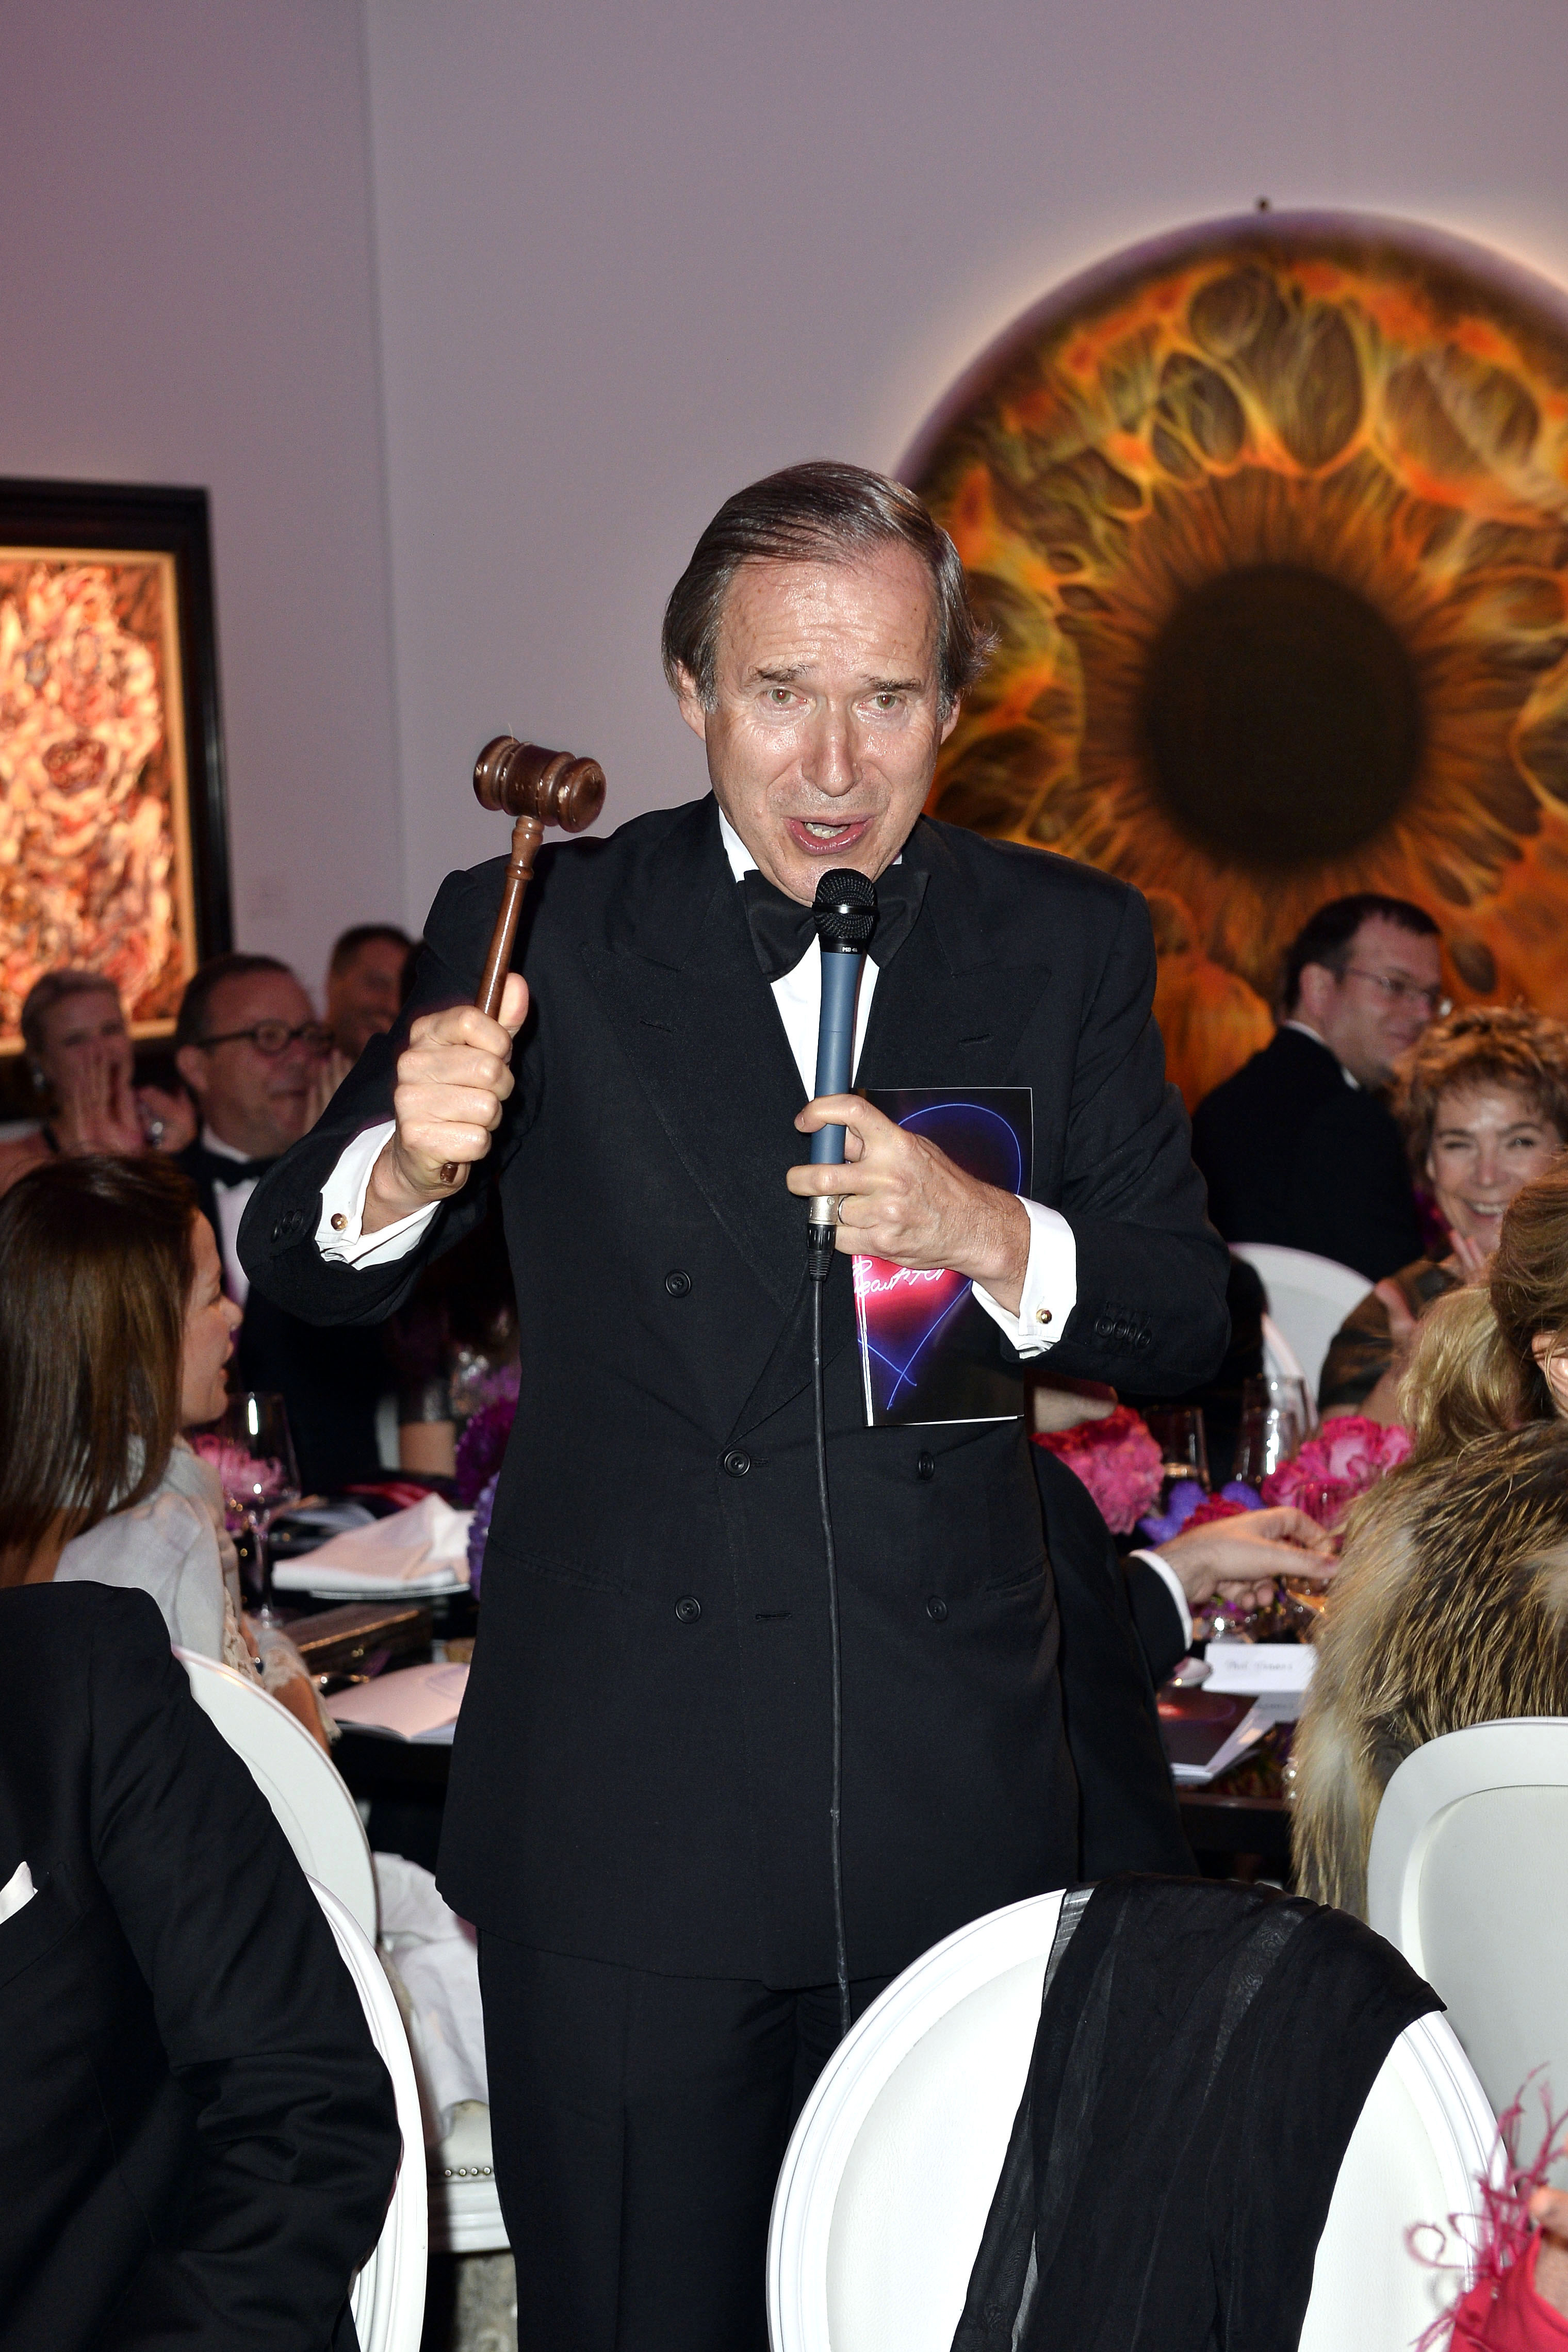 Five Minutes with Auctioneer Simon de Pury 